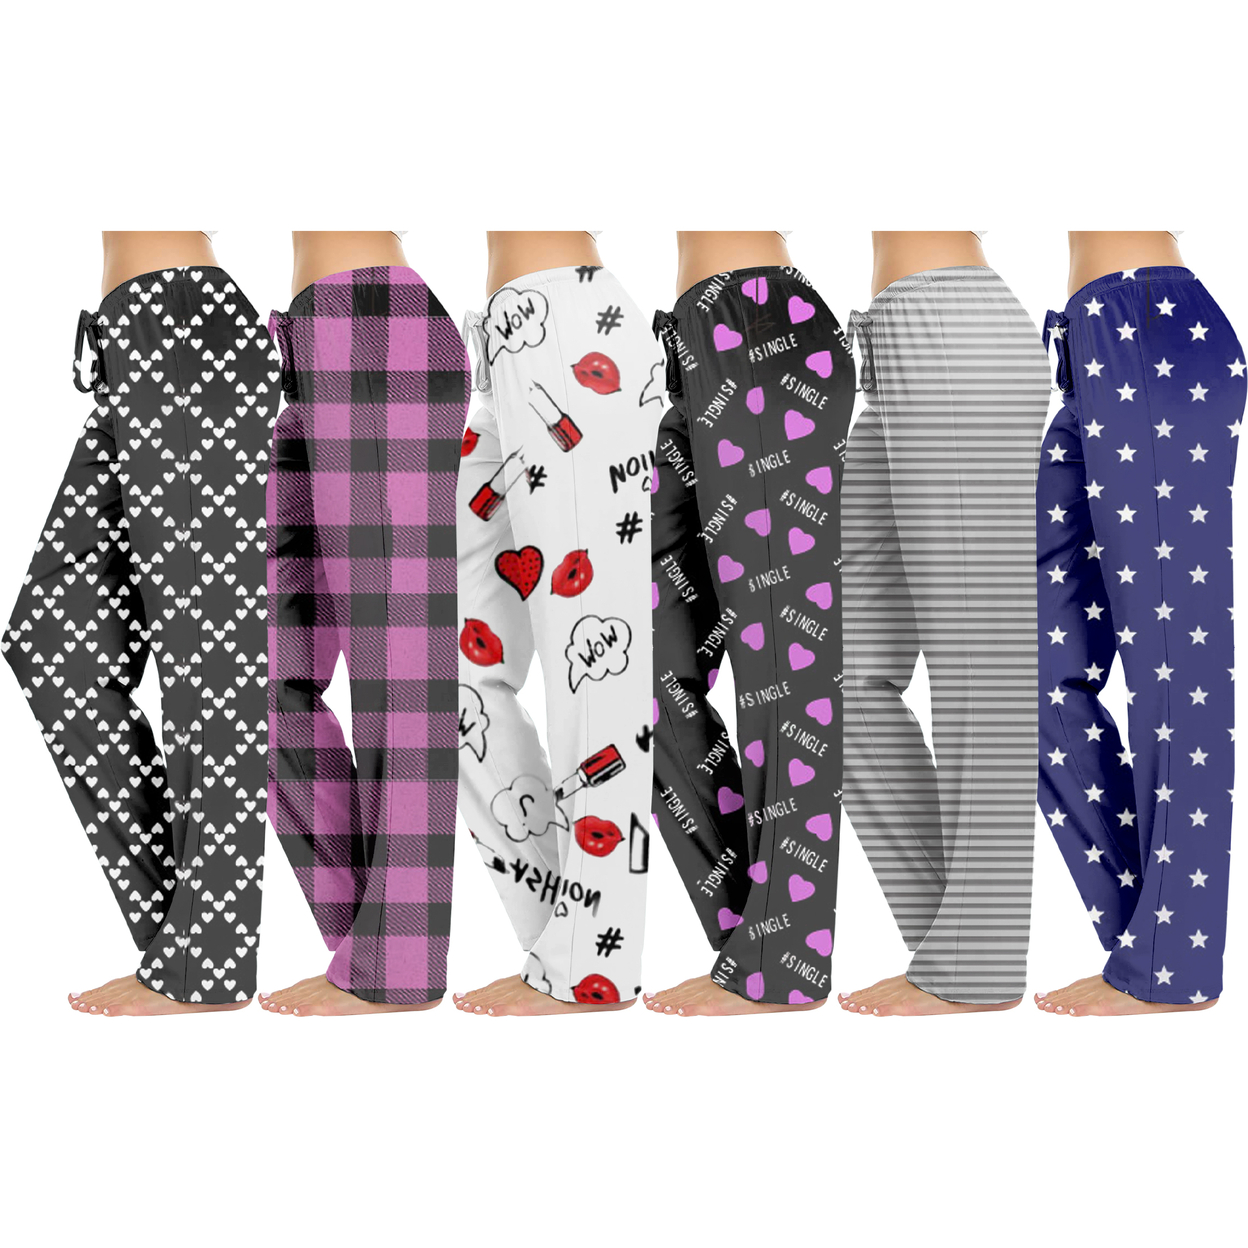 5-Pack: Women's Casual Fun Printed Lightweight Lounge Terry Knit Pajama Bottom Pants - Small, Love